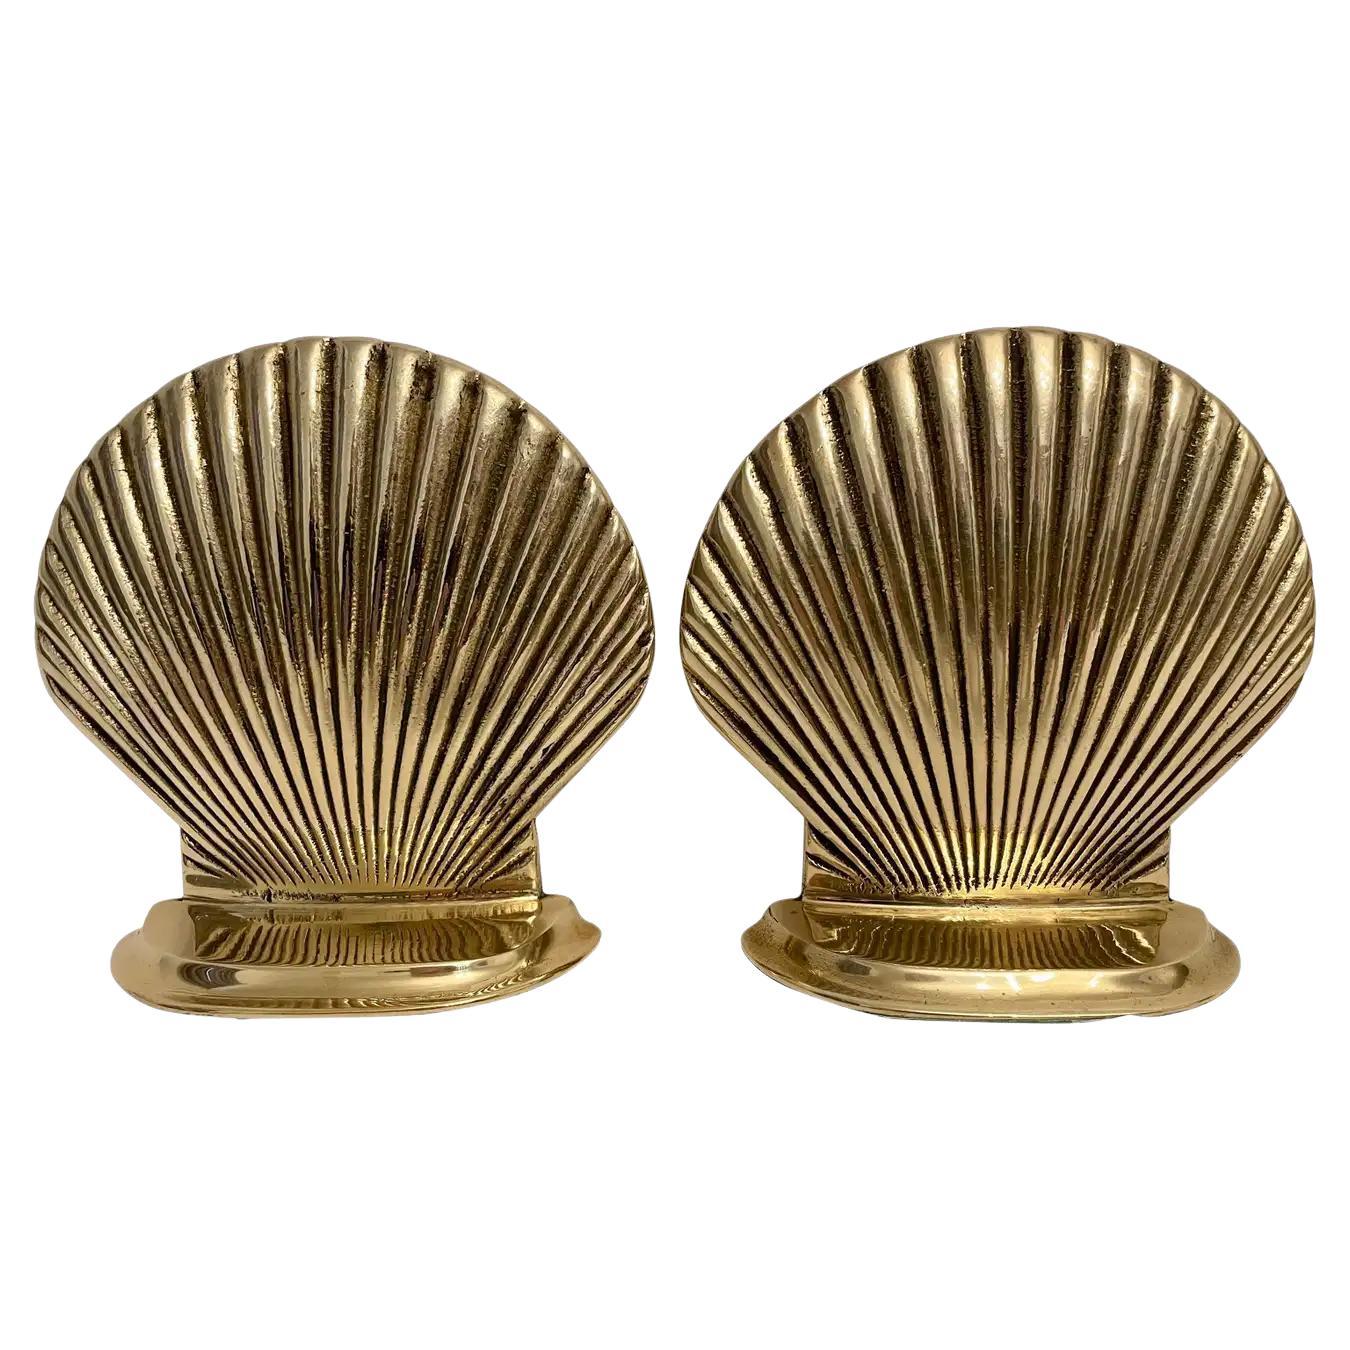 Vintage Hollywood Regency brass clam shell seashell bookends. Larger size, 5